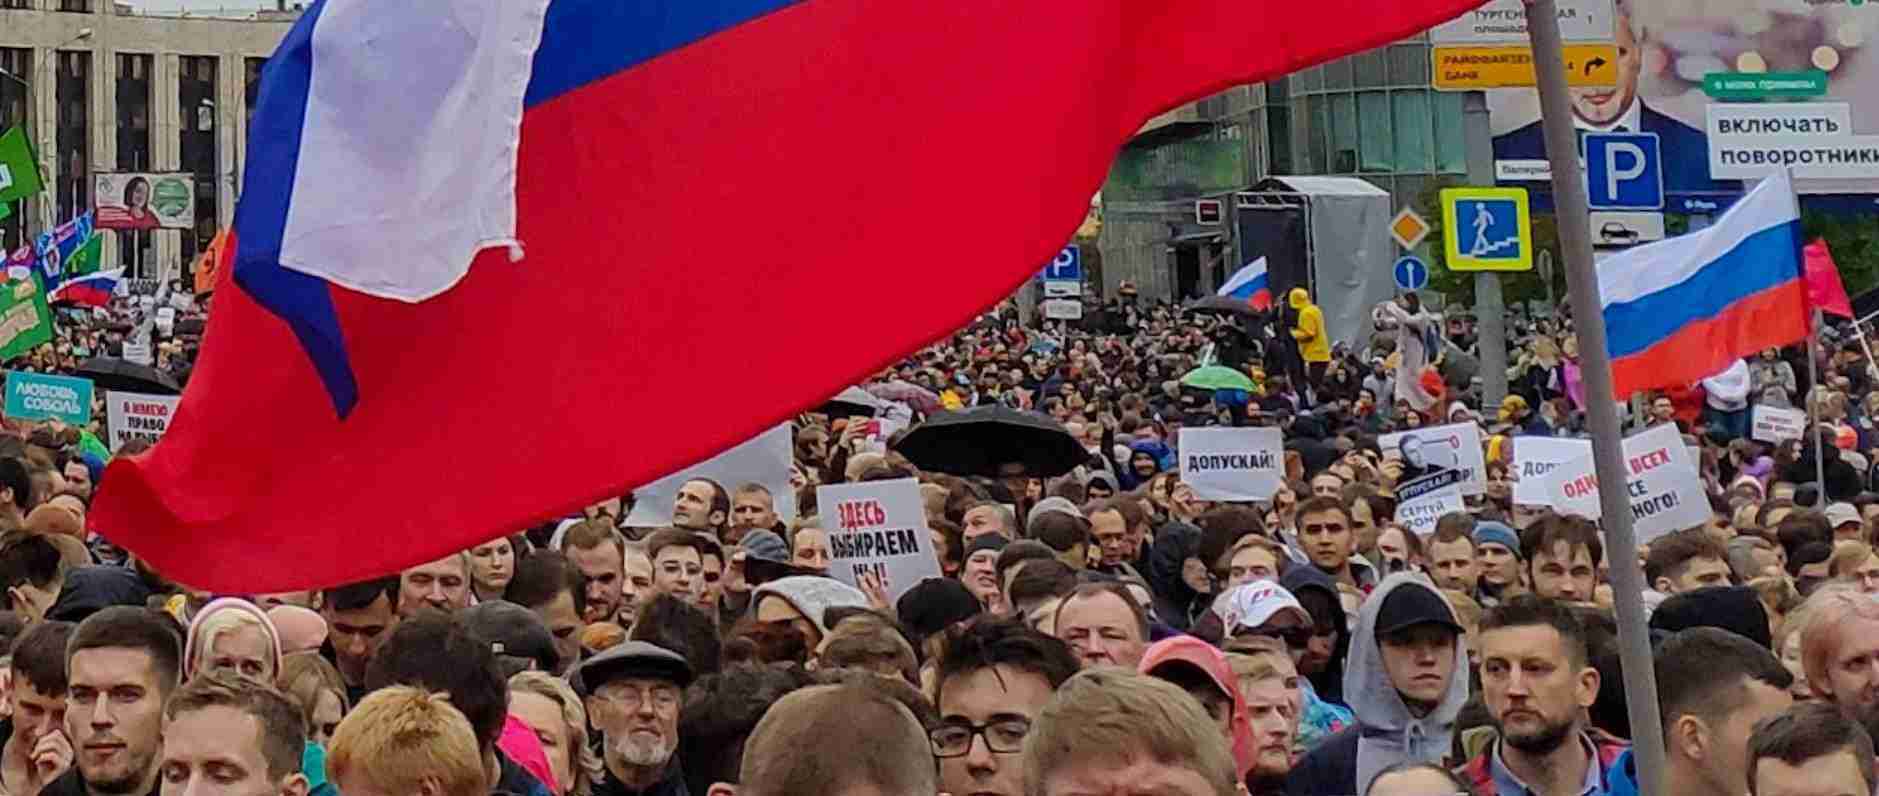 Protests Begin In Russia After Putin News